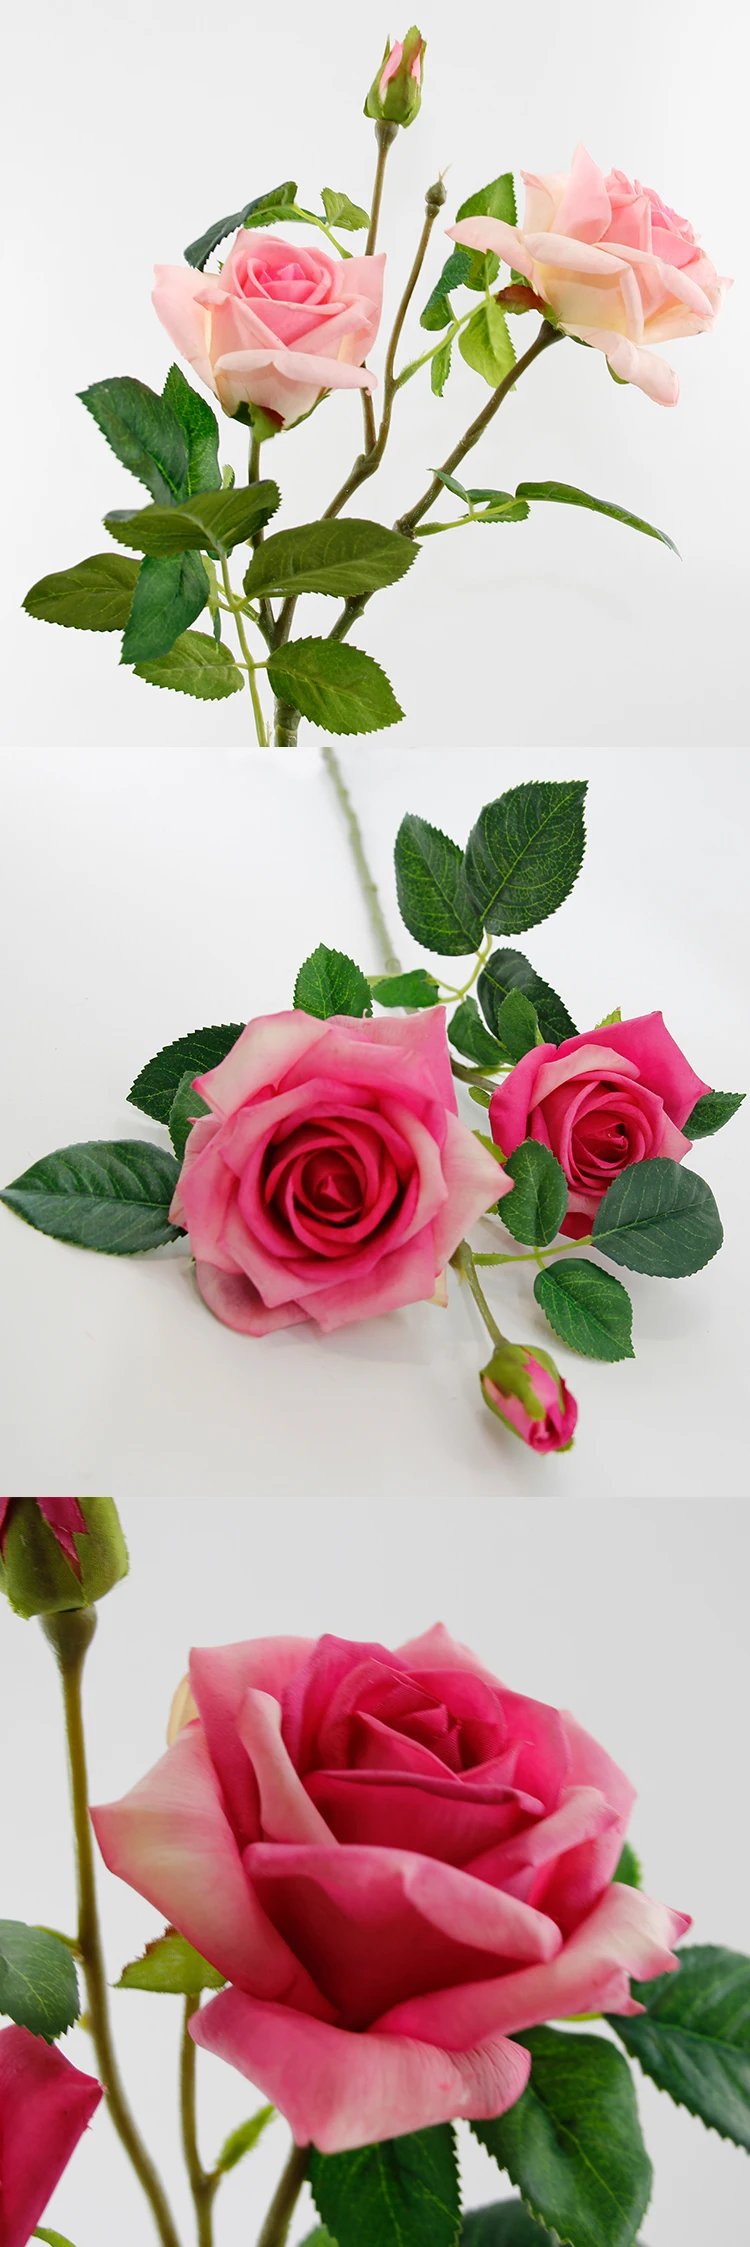 China Hot Sale Factory Attractive Artificial Flowers Wholesale Artificial Rosa Australia Rose Flower For Home Wedding Decor Buy Artificial Rosa Australia Artificial Flowers Wholesale Inflatable Rose Flower Product On Alibaba Com